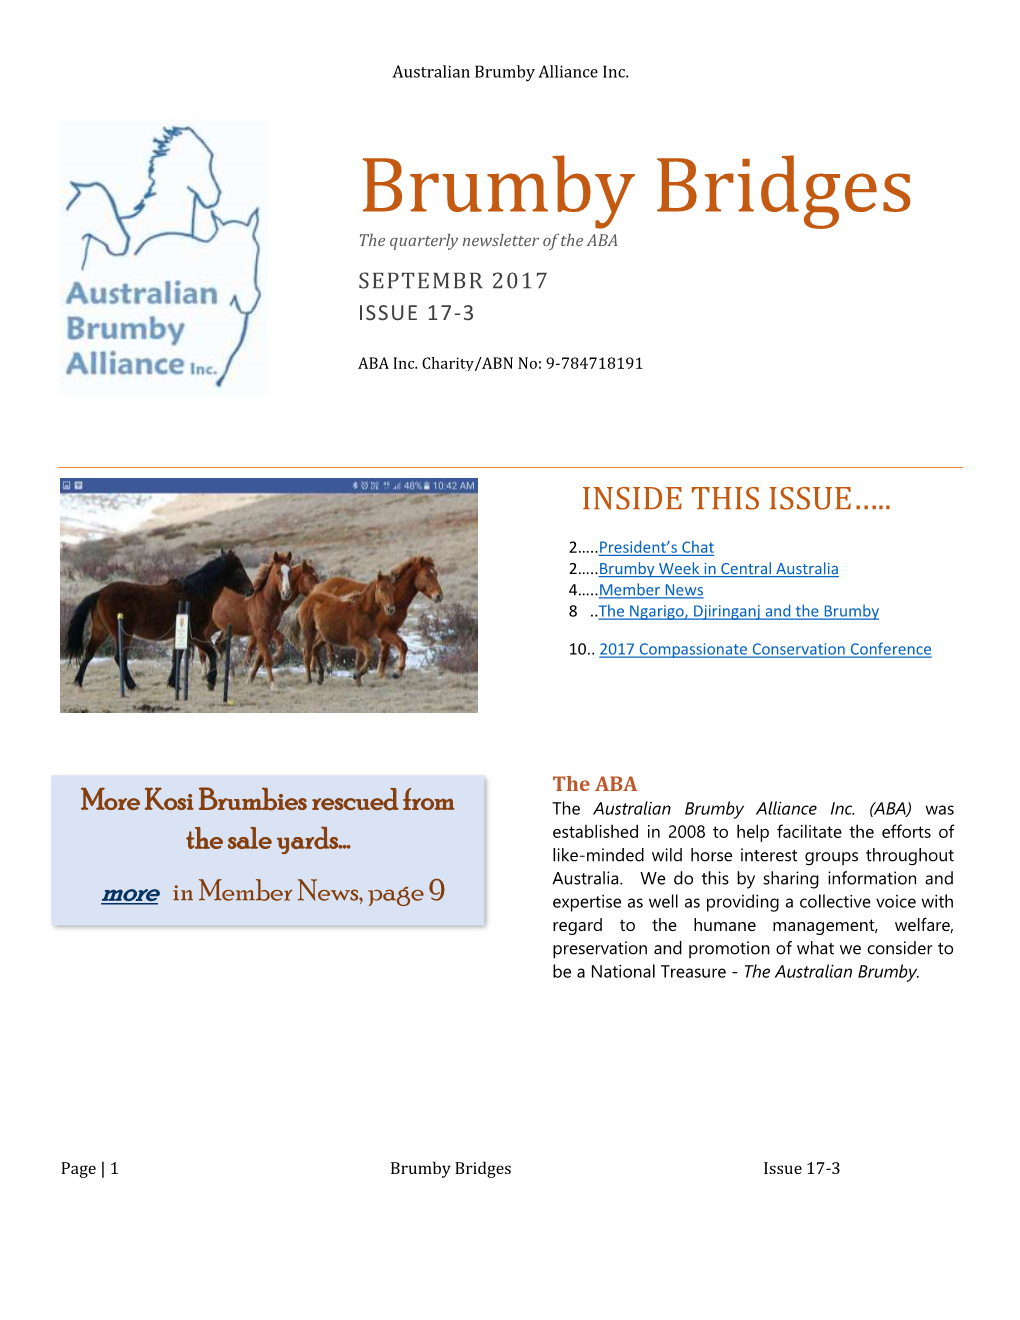 Brumby Bridges the Quarterly Newsletter of the ABA SEPTEMBR 2017 ISSUE 17-3